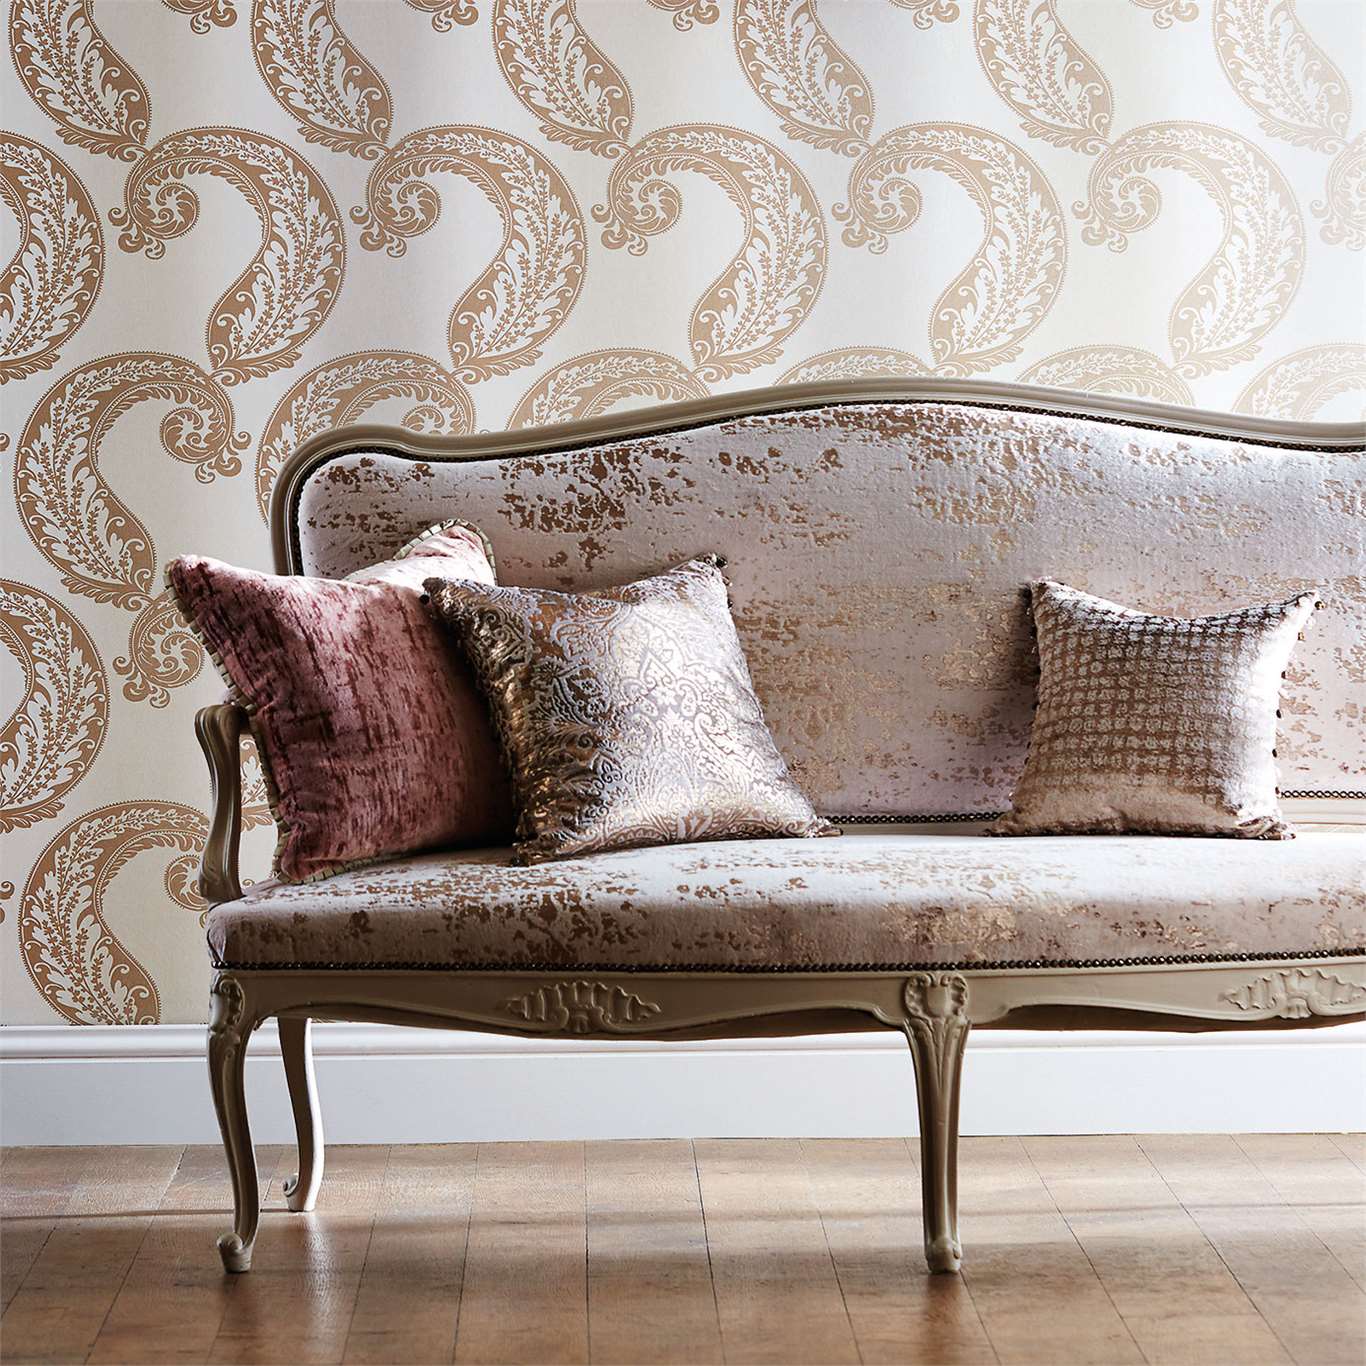 Adella, A Wallpaper By Harlequin, Part Of The Leonida - Harlequin Leonida Adella - HD Wallpaper 